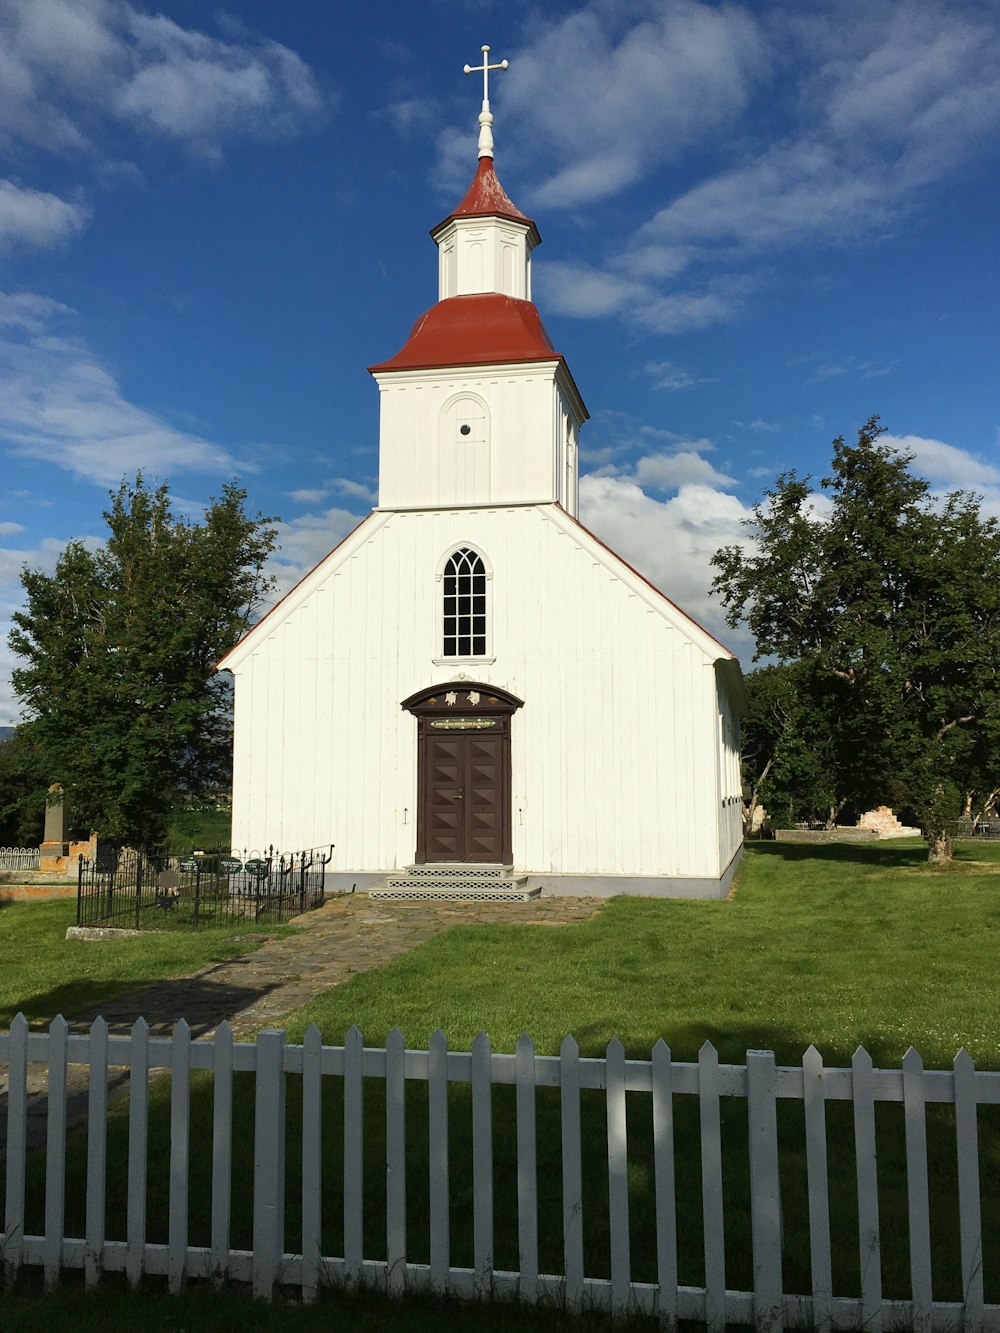 a white church with a red roof